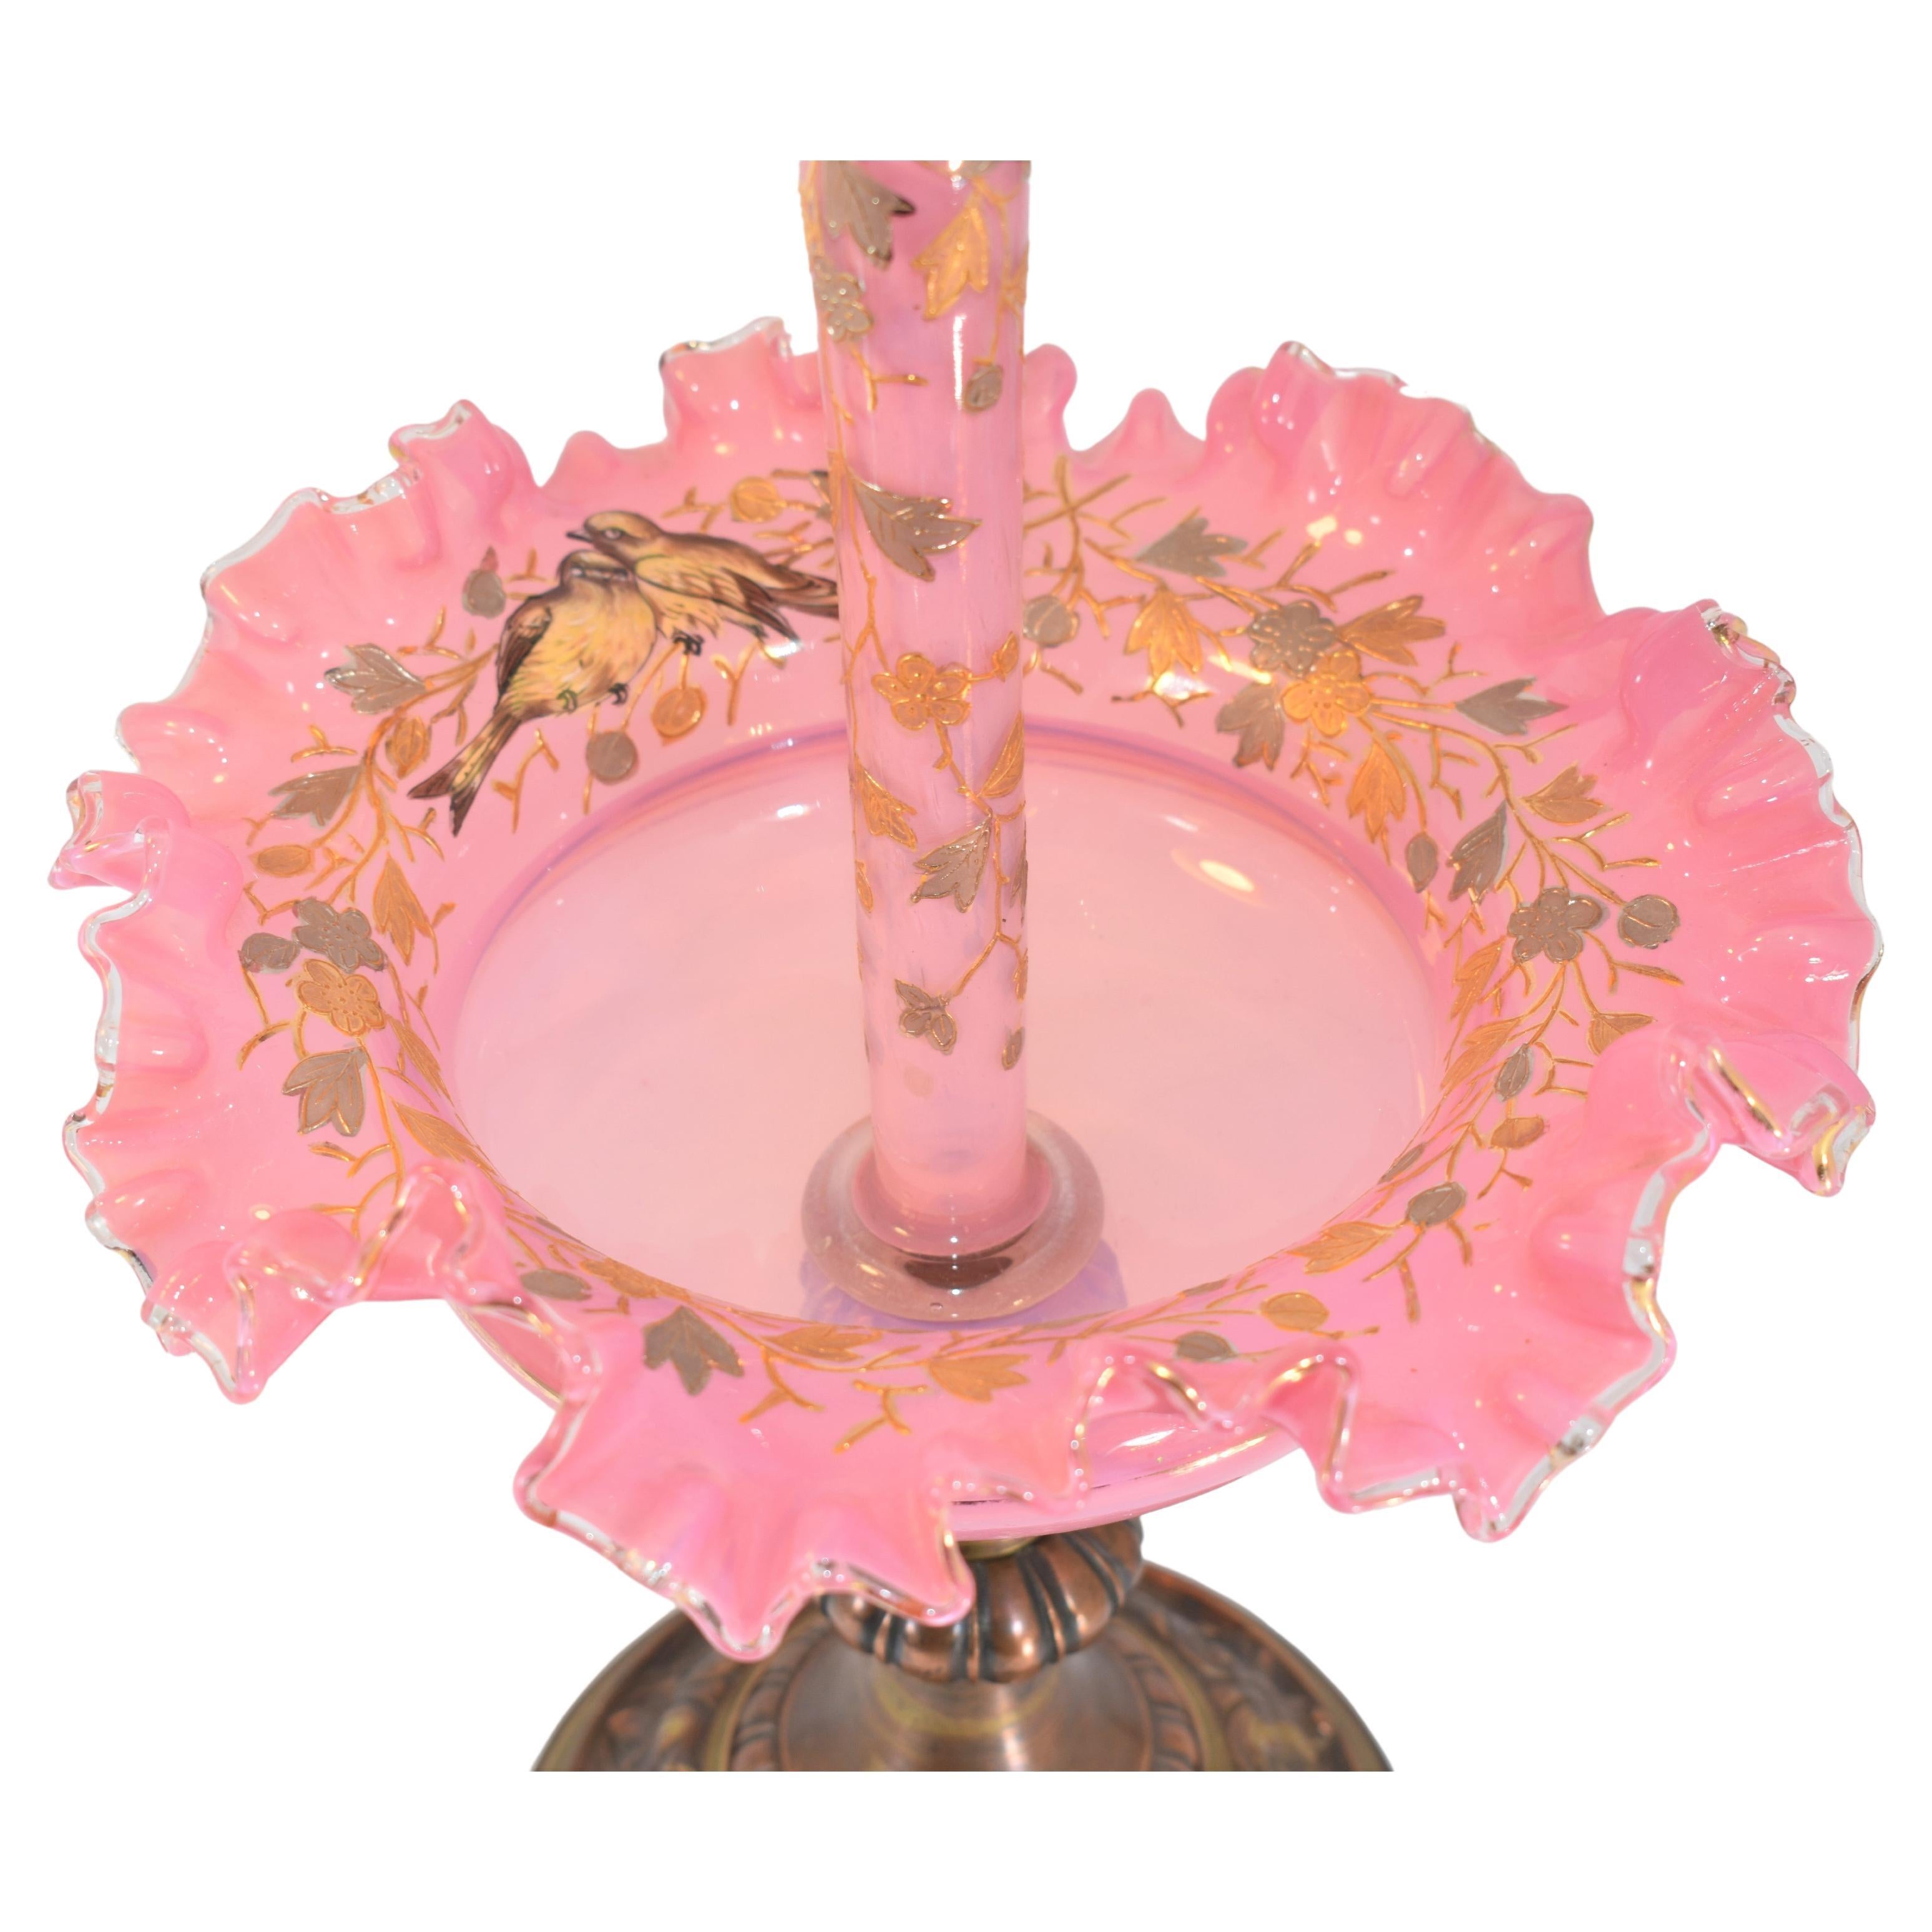 Enameled Large Antique Moser Pink Opaline Glass Epergne Centerpiece, 19th Century For Sale